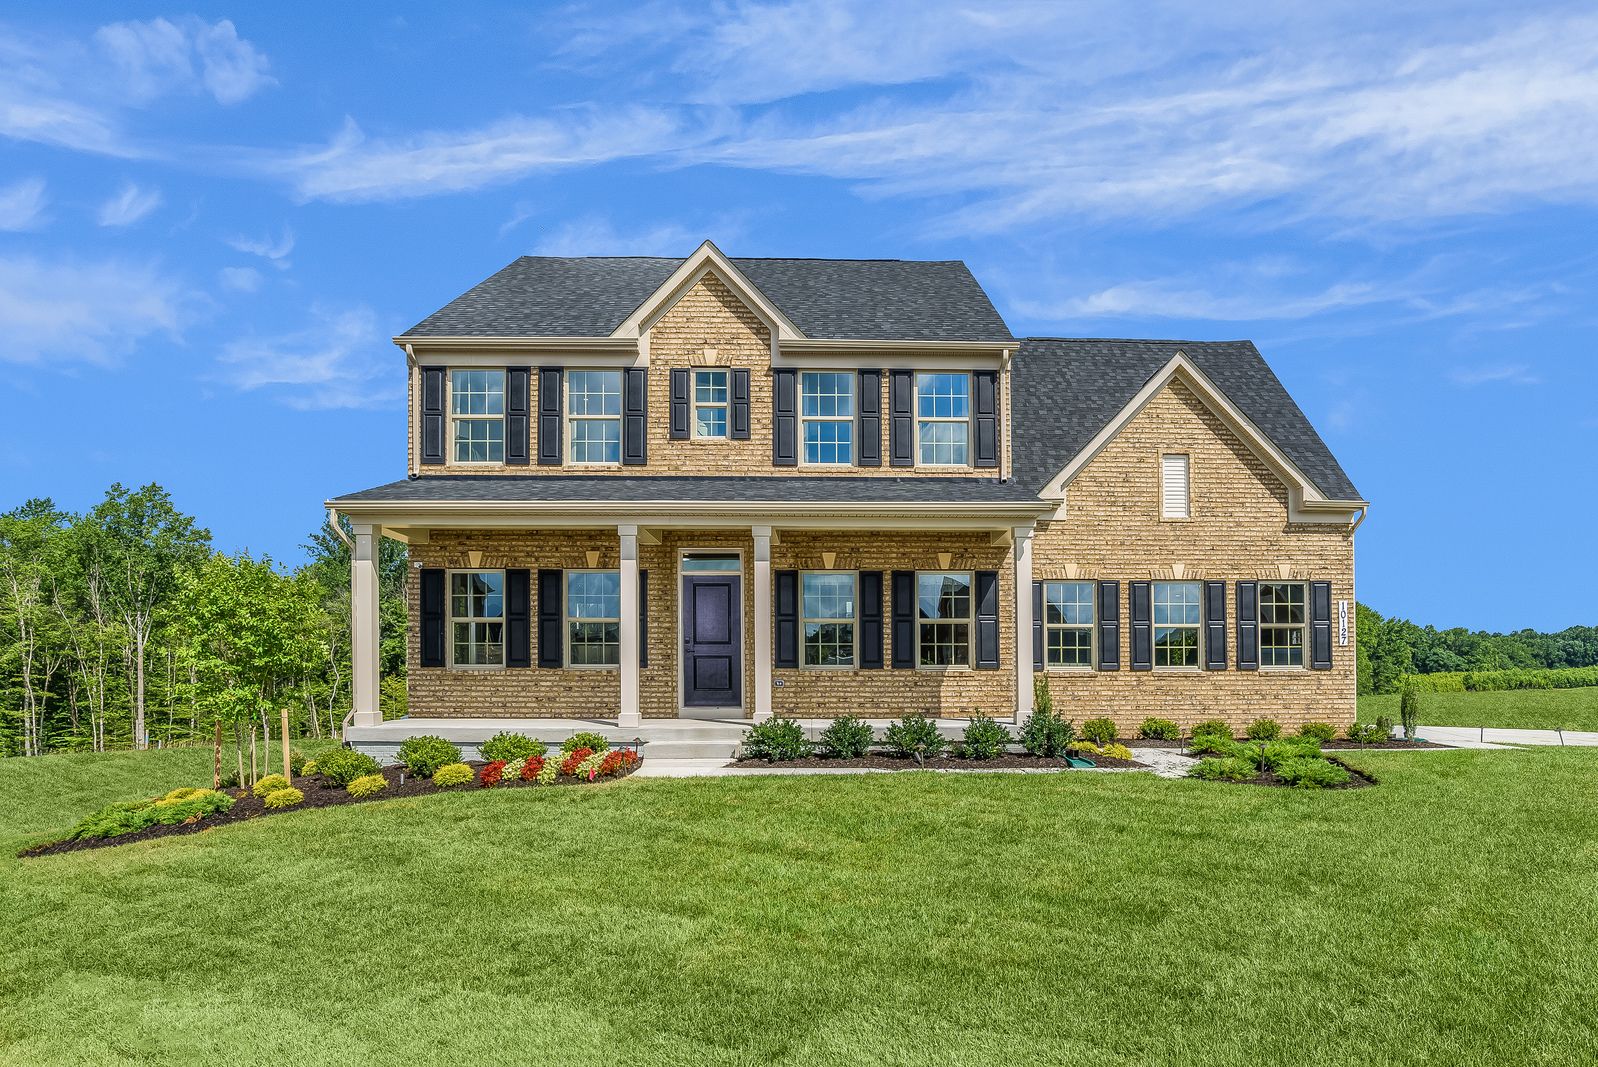 WELCOME TO CANTER CREEK IN UPPER MARLBORO, MD